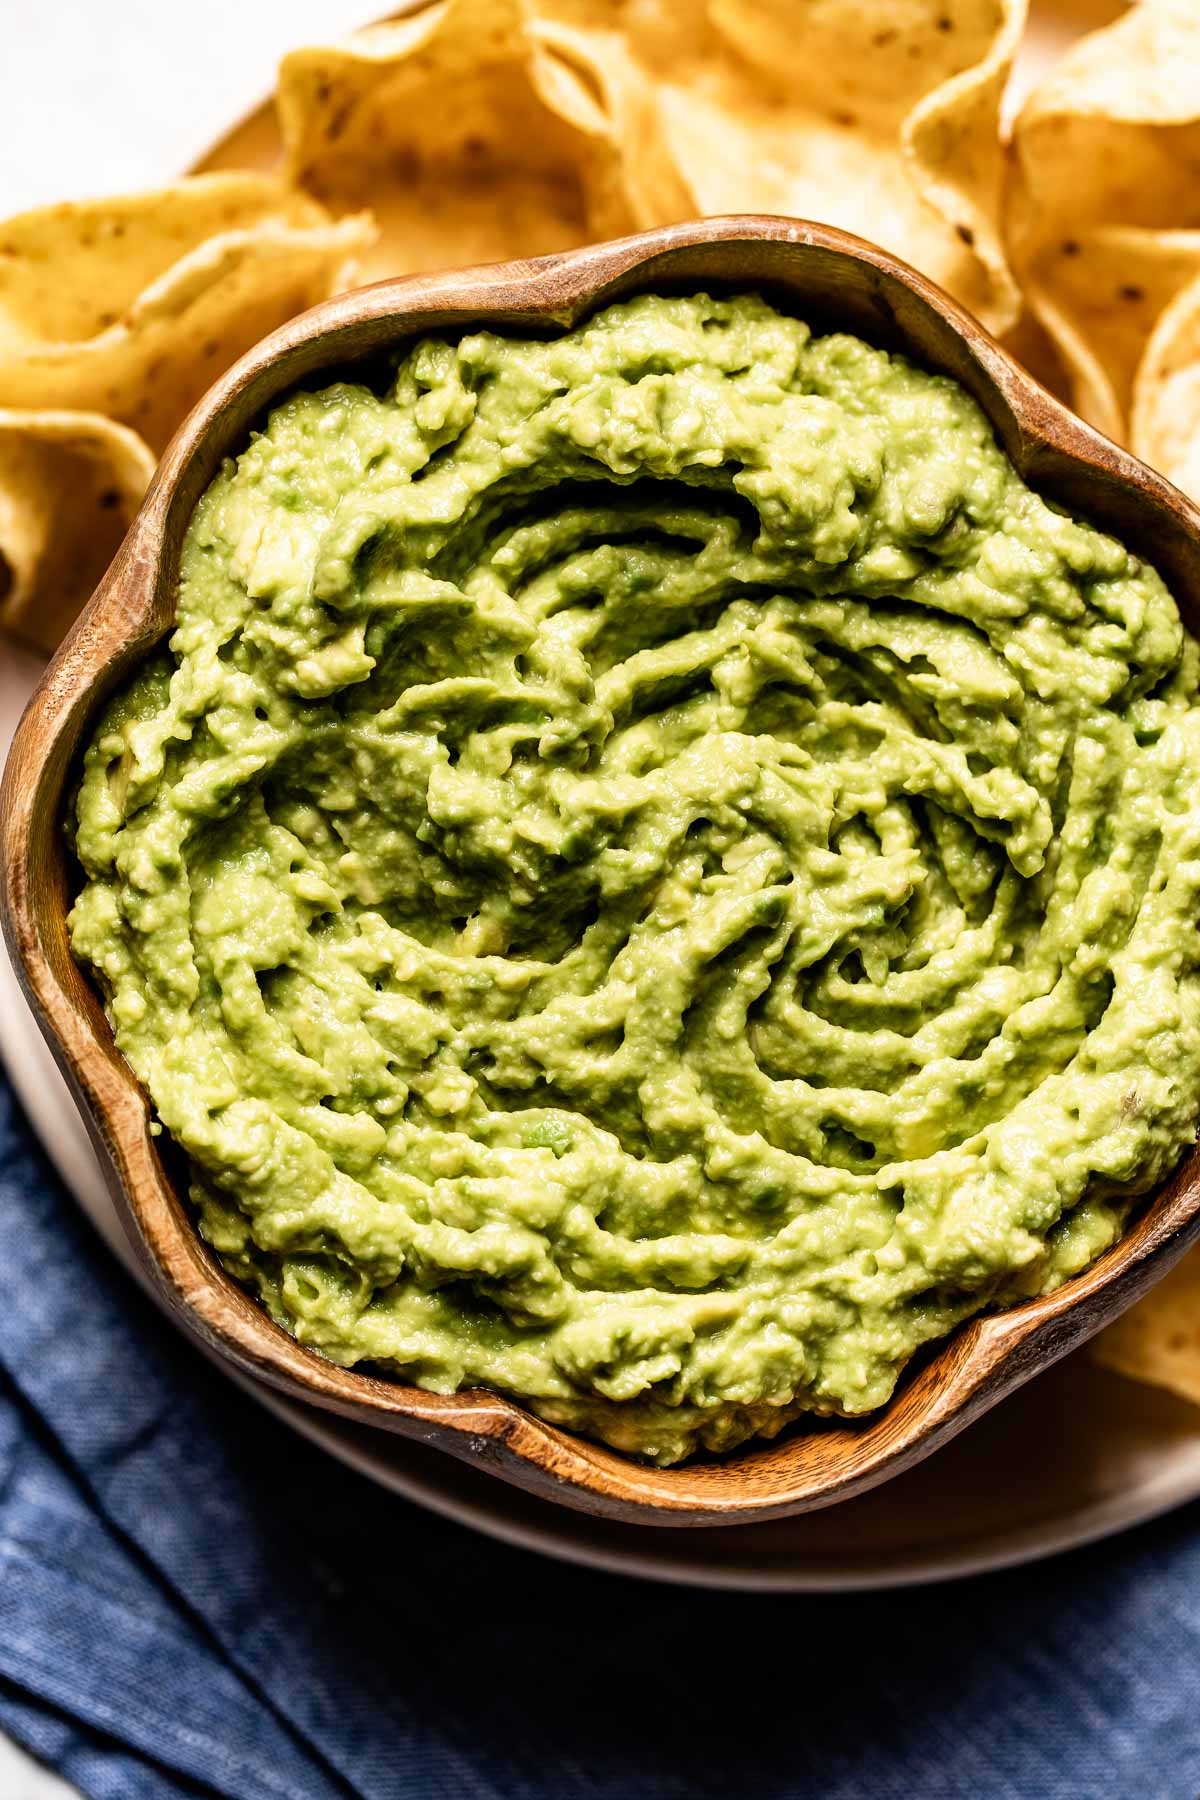 4 Ingredient guacamole from the top view served with tortilla chips